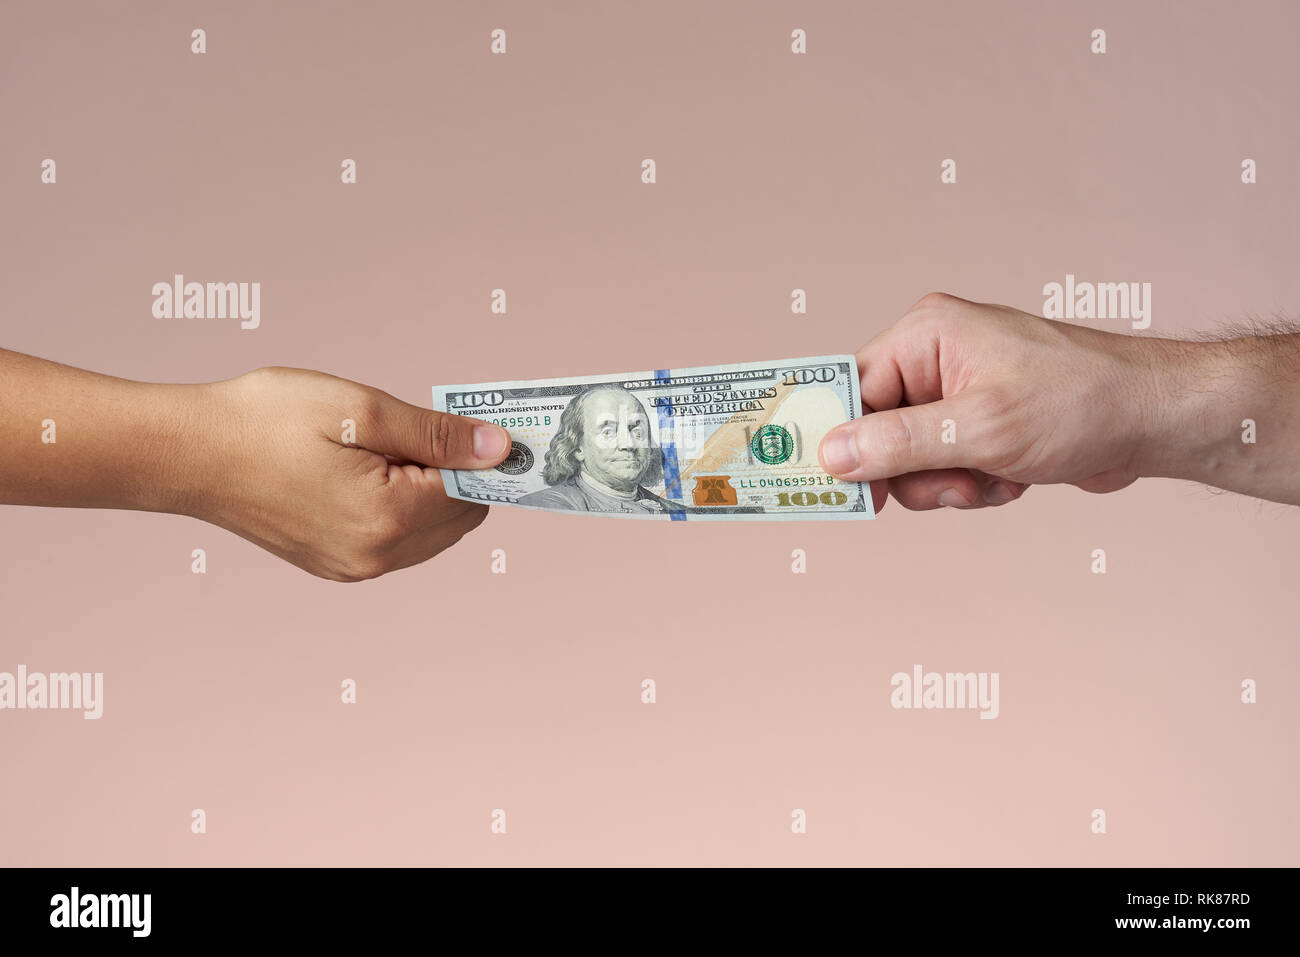 Two hands holding dollar bill. Hands sharing US money. Paying or trading concept. Stock Photo